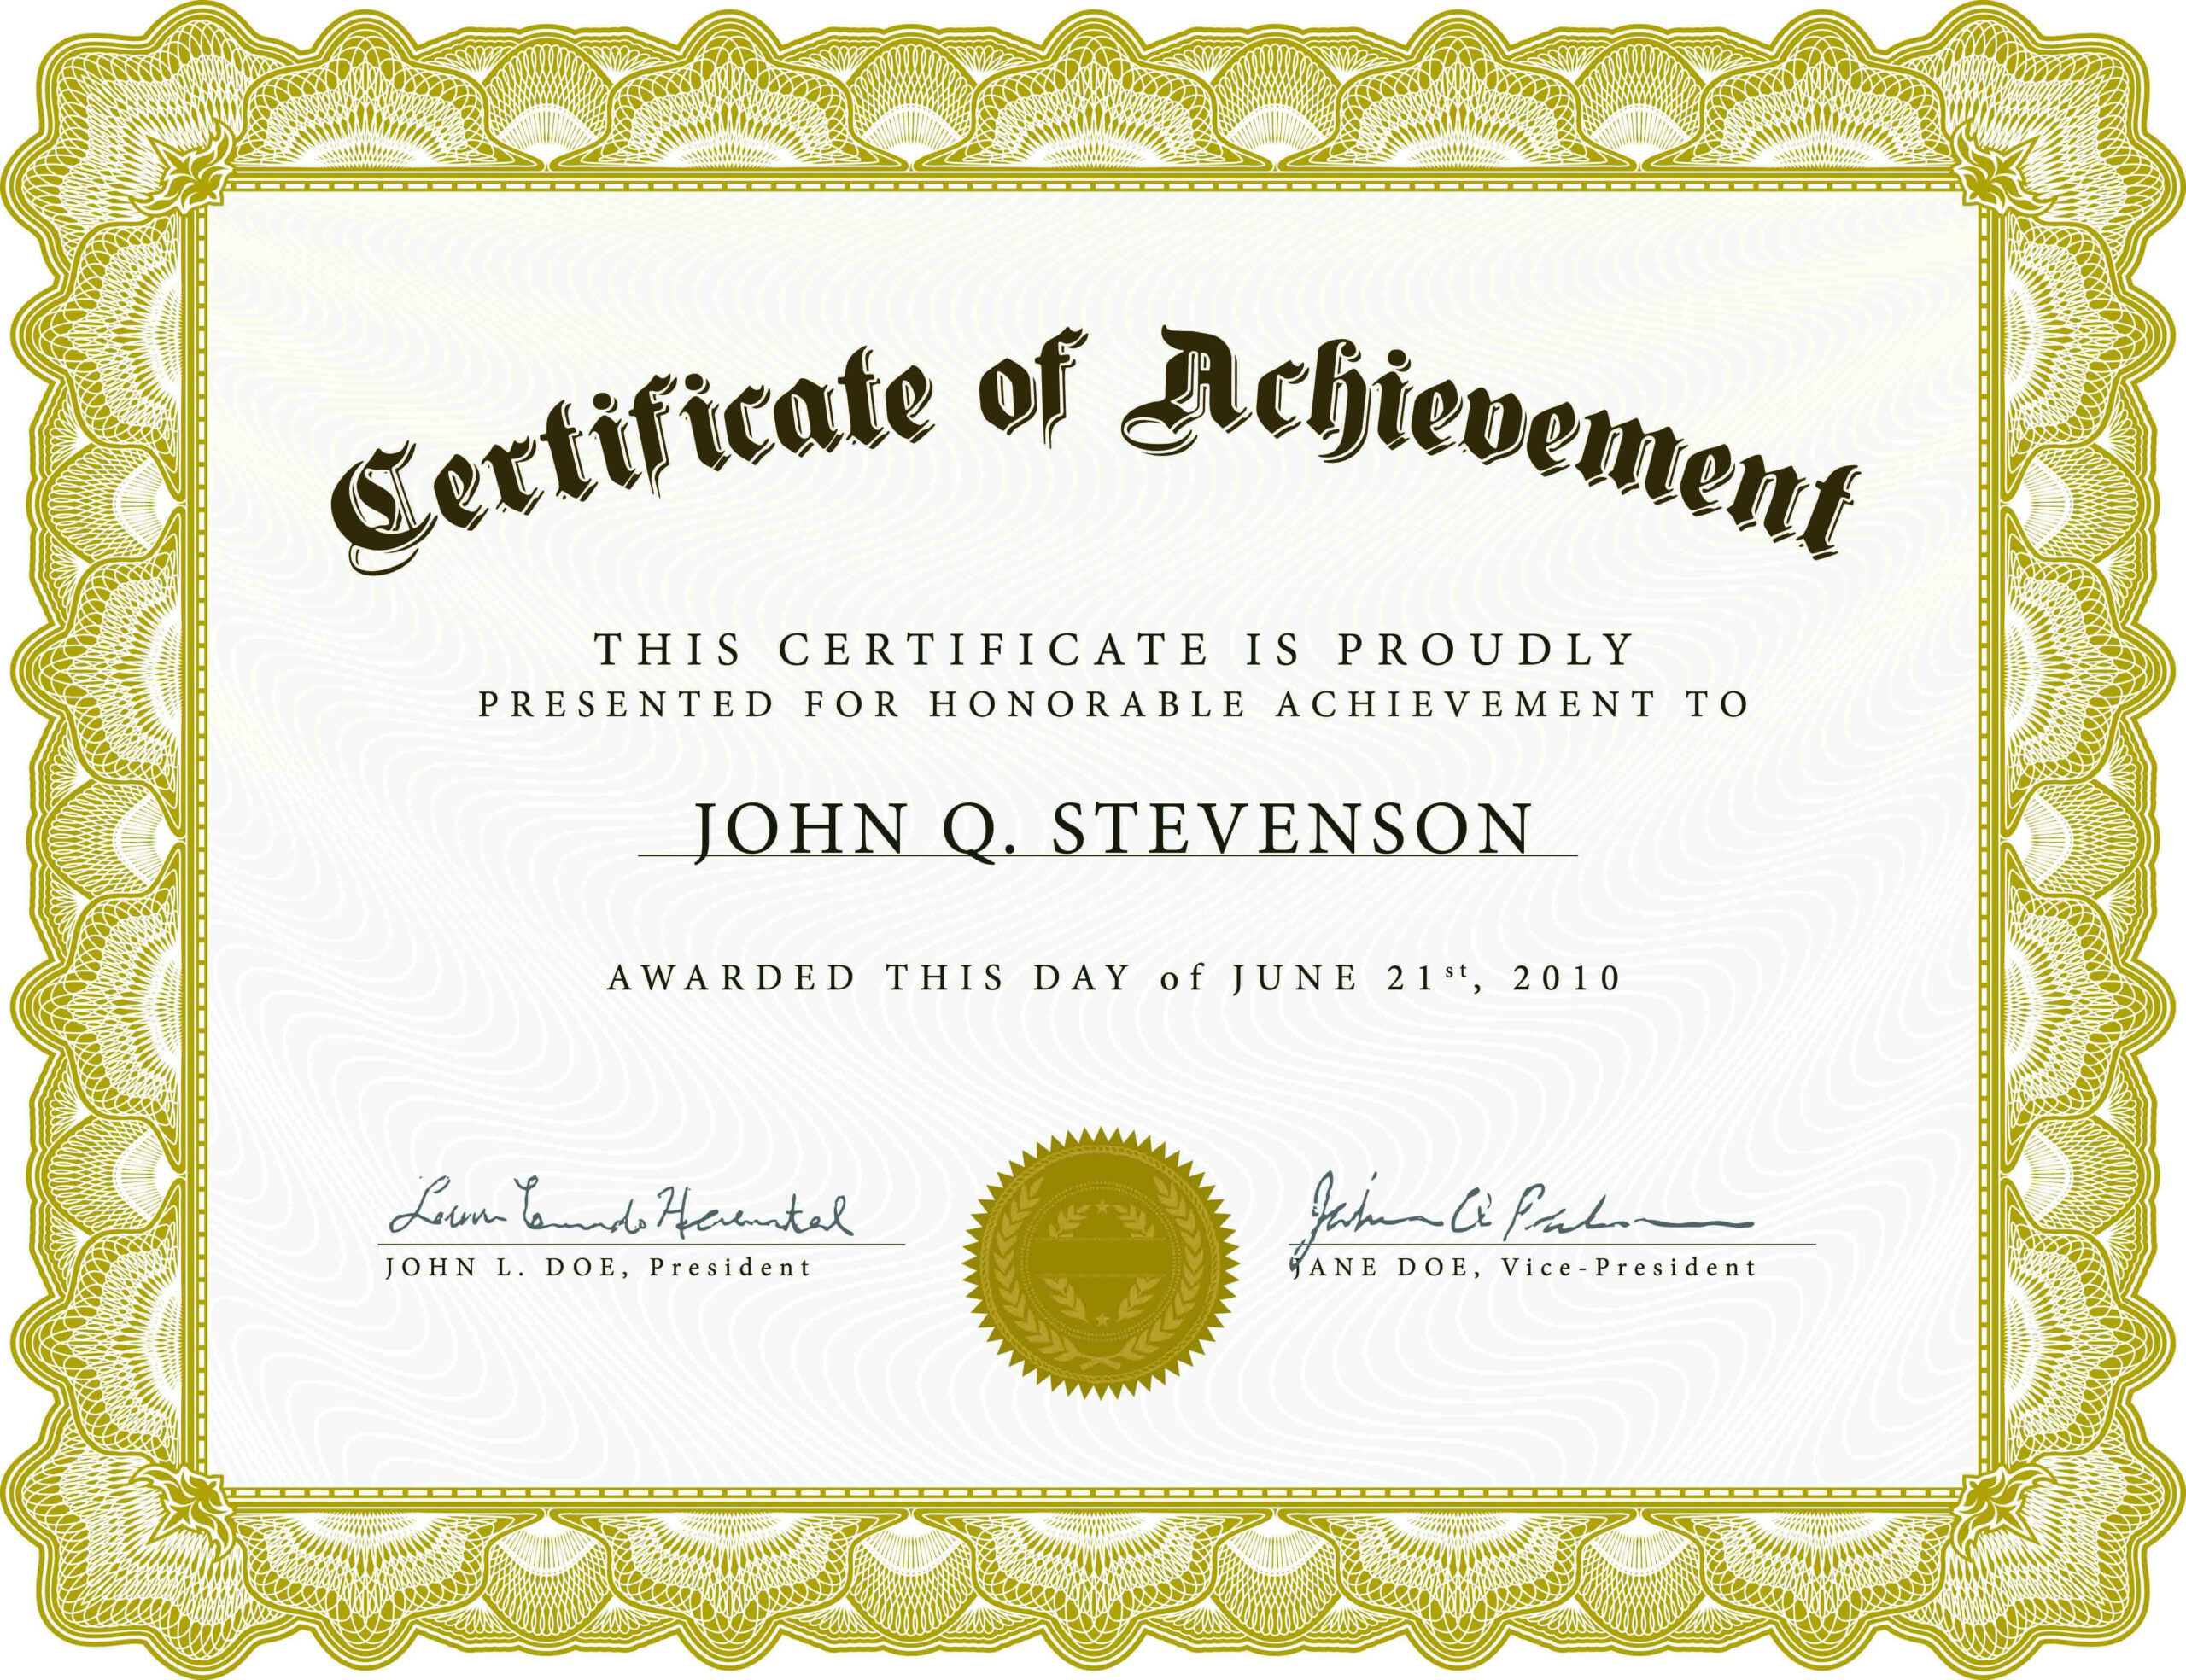 Employee Of The Month Certificate Sample  Calep within Free Funny Certificate Templates